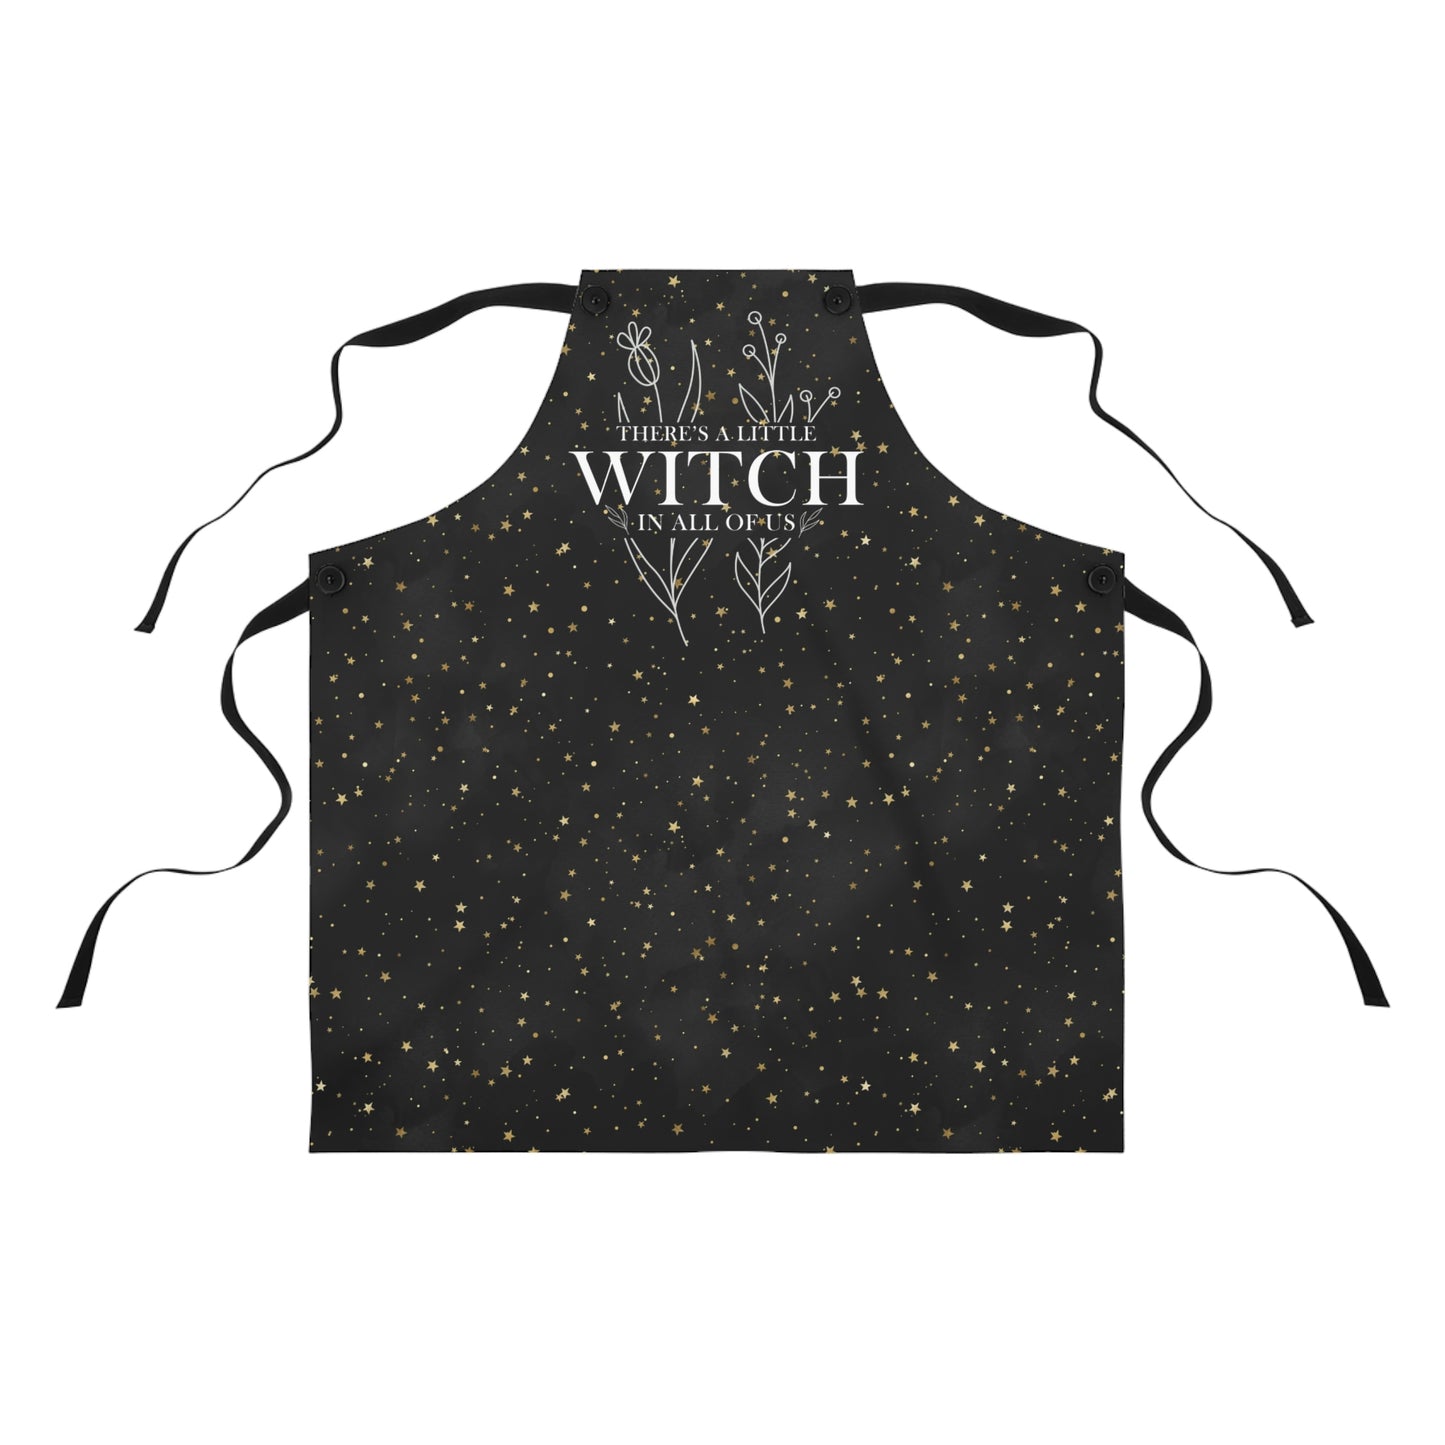 Kitchen Witch Apron - There's a little WITCH in all of us - Black stars background -  One Size - witchy gift, wiccan gift, goth, gothic